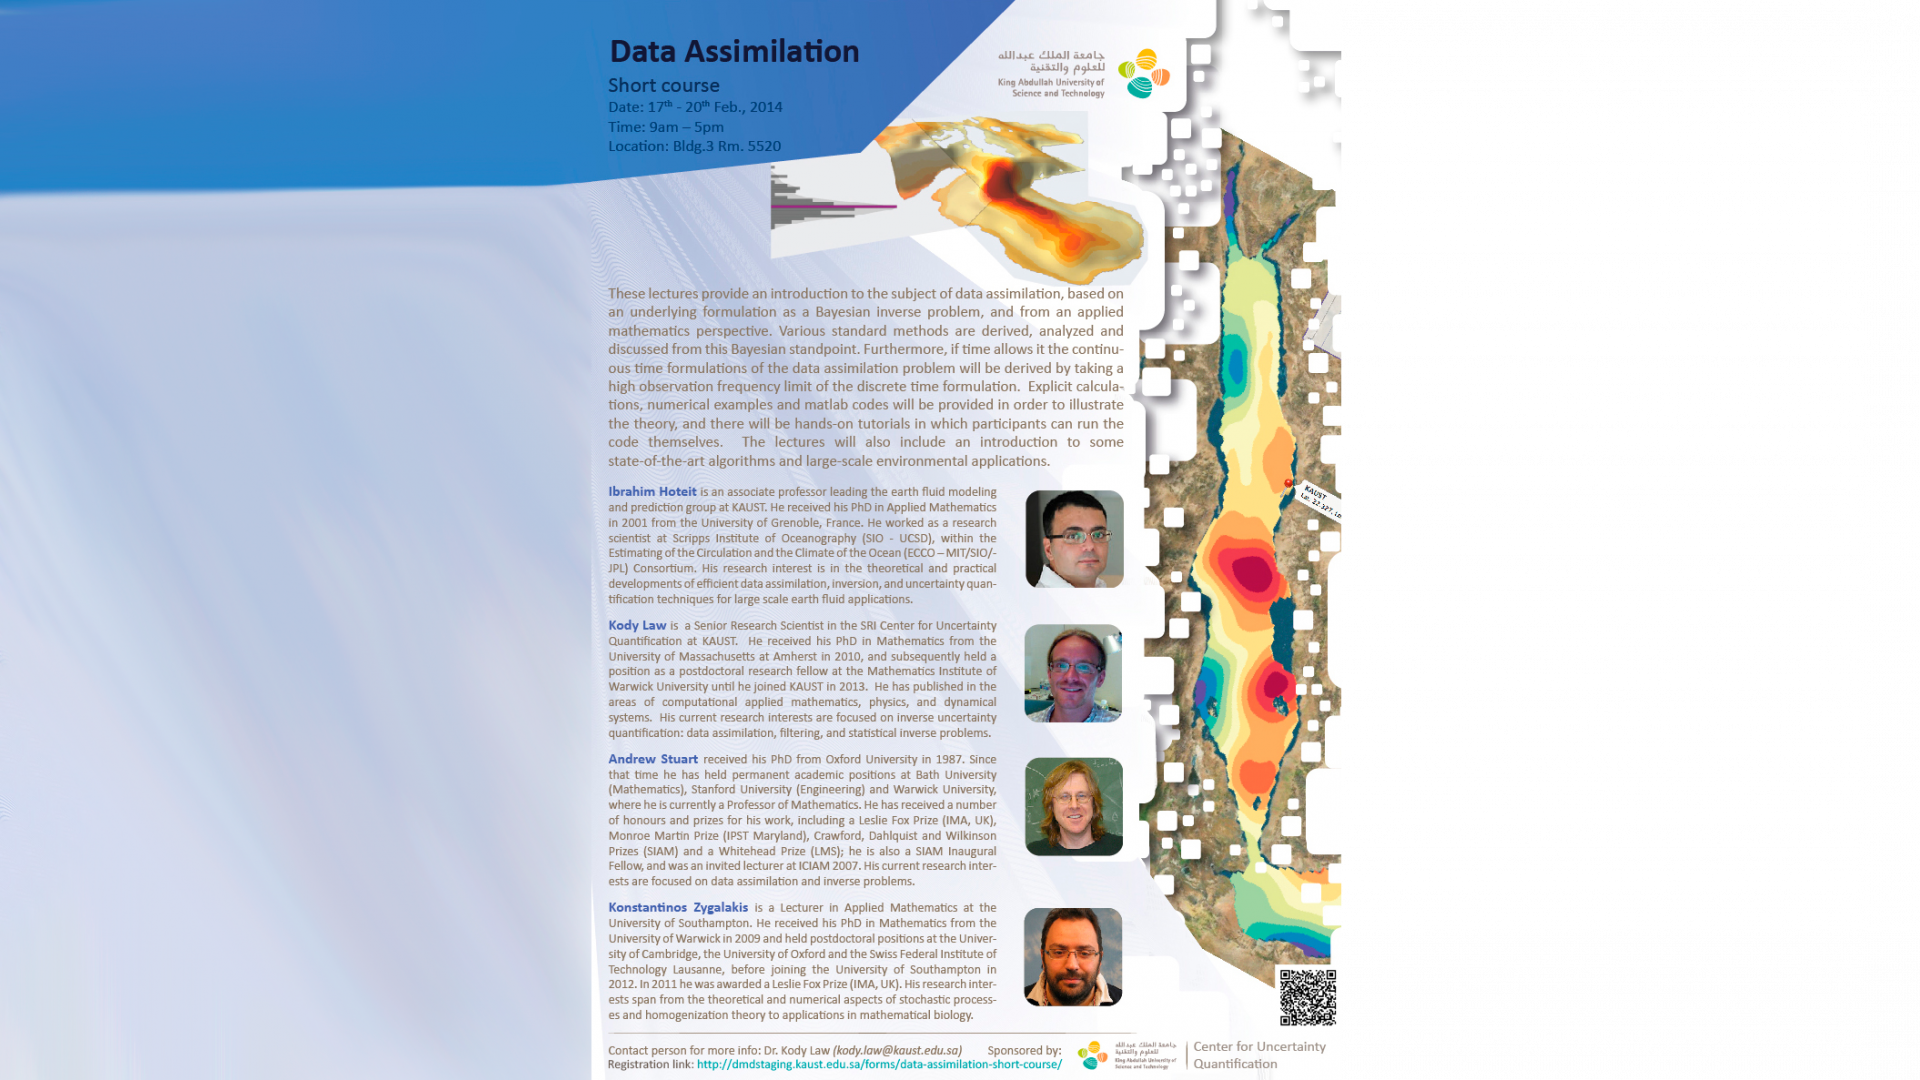 KAUST CEMSE AMCS STOCHNUM Data Assimilation Short Course Poster